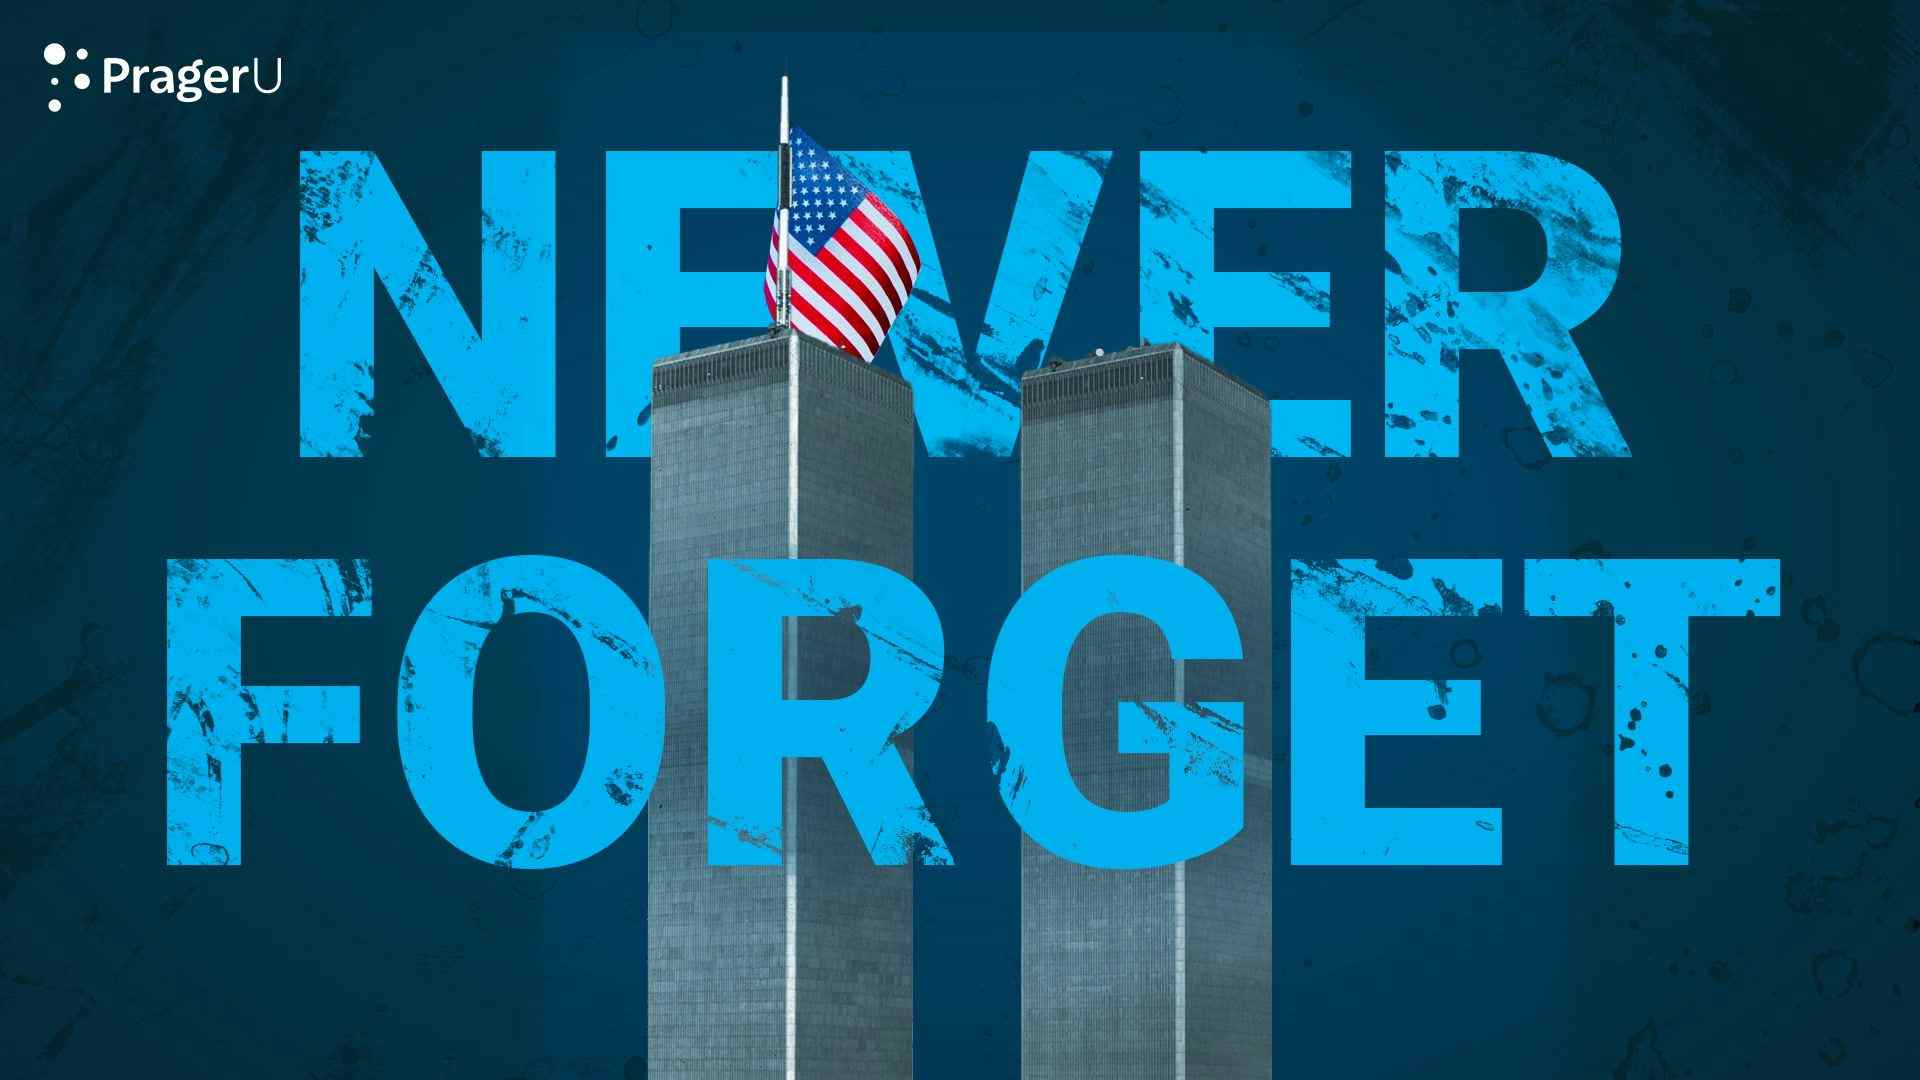 9/11: We Must Never Forget